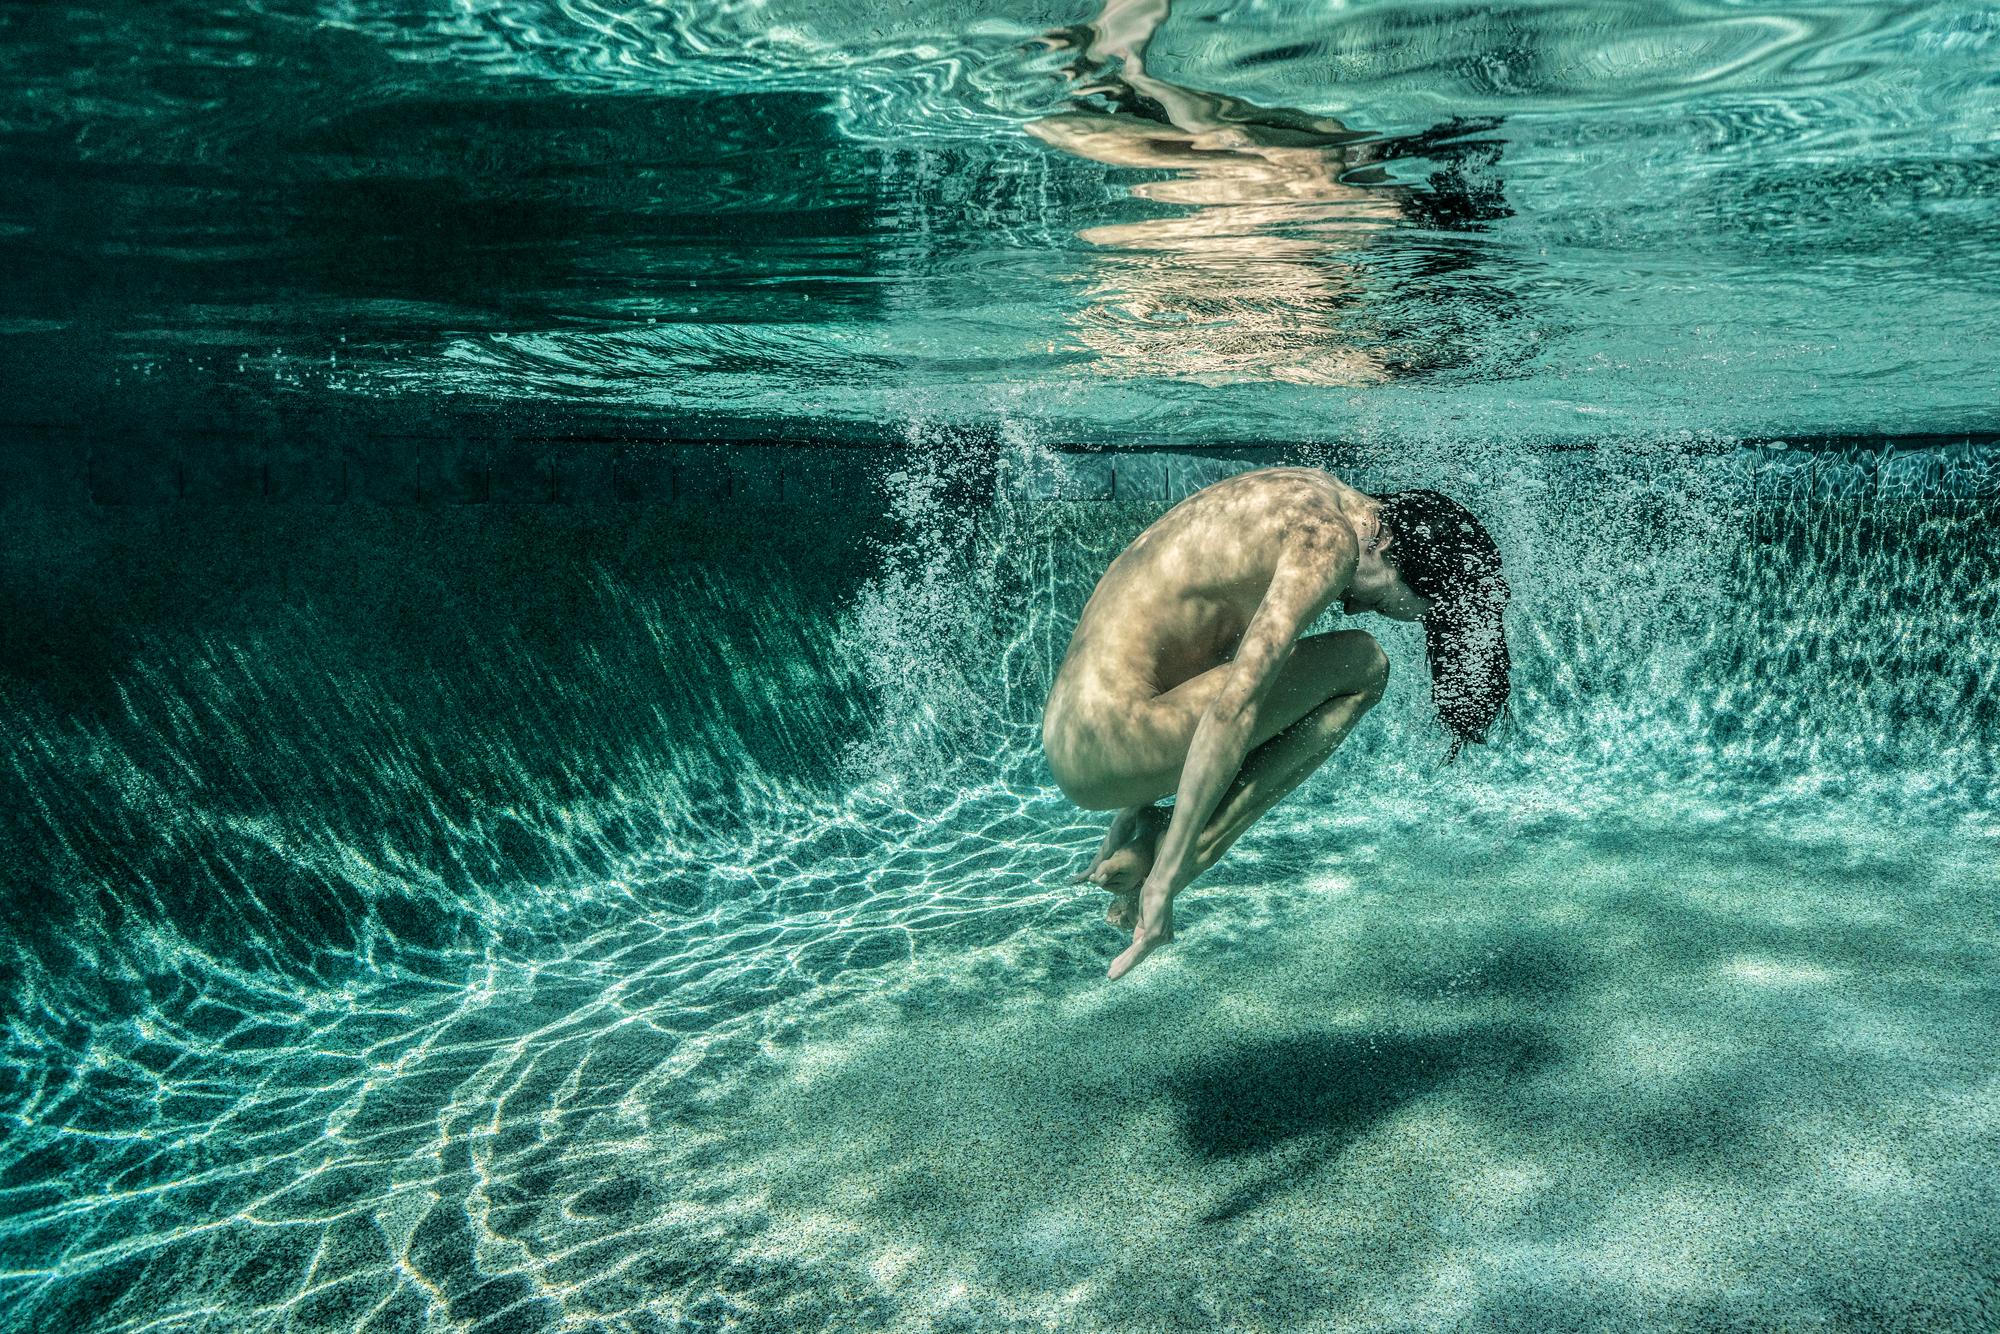 Alex Sher Nude Photograph - Green Roll III - underwater nude photograph - archival pigment print 18" x 24"